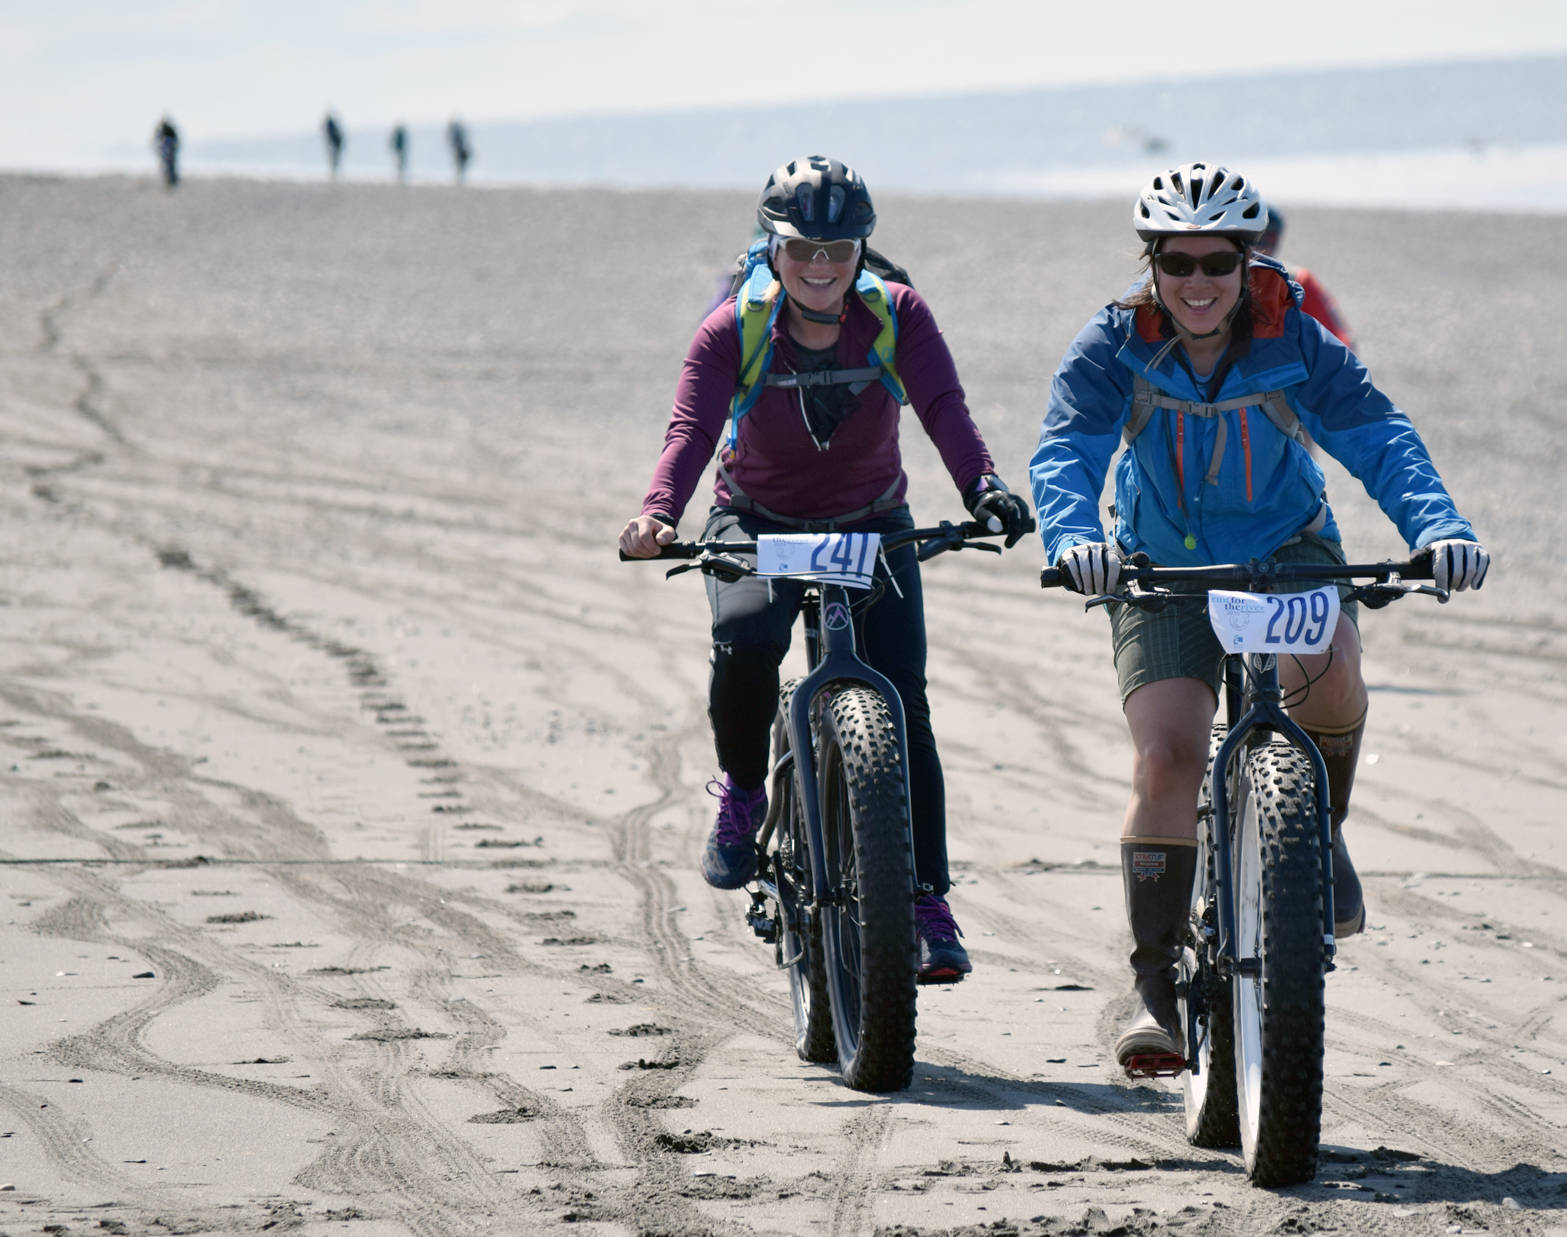 Morgan Aldridge and Mary Simondsen approach the end of the 10-mile bike ride at the Mouth to Mouth Wild Run and Ride on Monday, May 29, 2017. (Photo by Jeff Helminak/Peninsula Clarion)